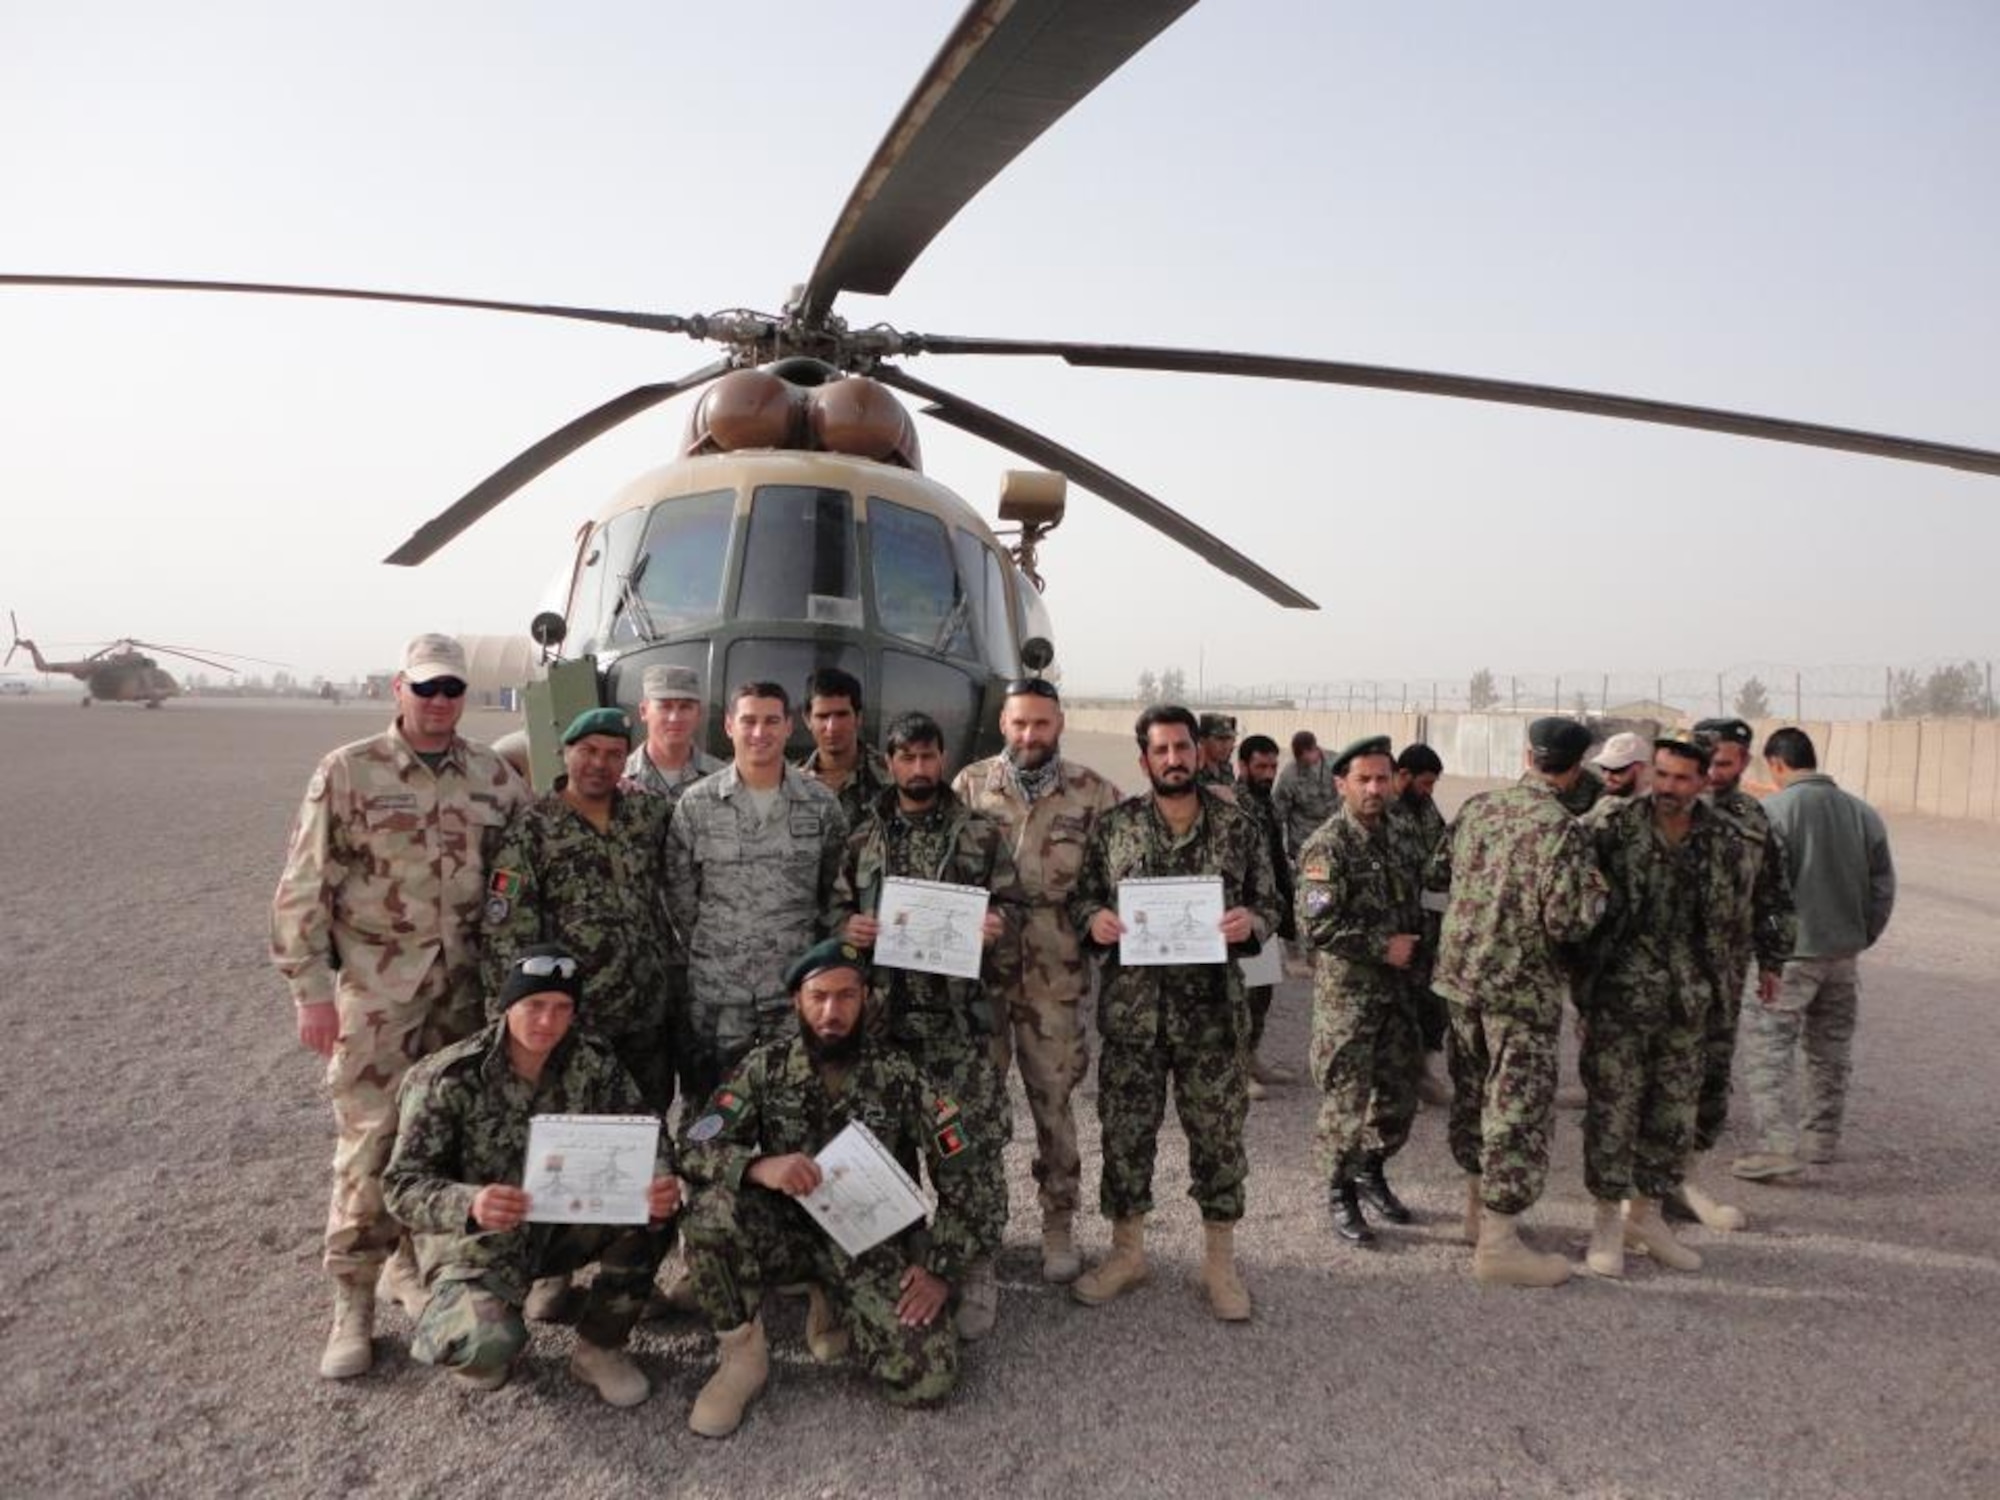 Simon poses with first Afghan Air Force maintainers in 2011 after they received their 3-level upgrade at Shindand Air Force Base, Afghanistan. The maintainers, referred to as "engine body mechanics," had to demonstrate competency of several core maintenance tasks to receive the upgrade. (U.S. Air Force photo)